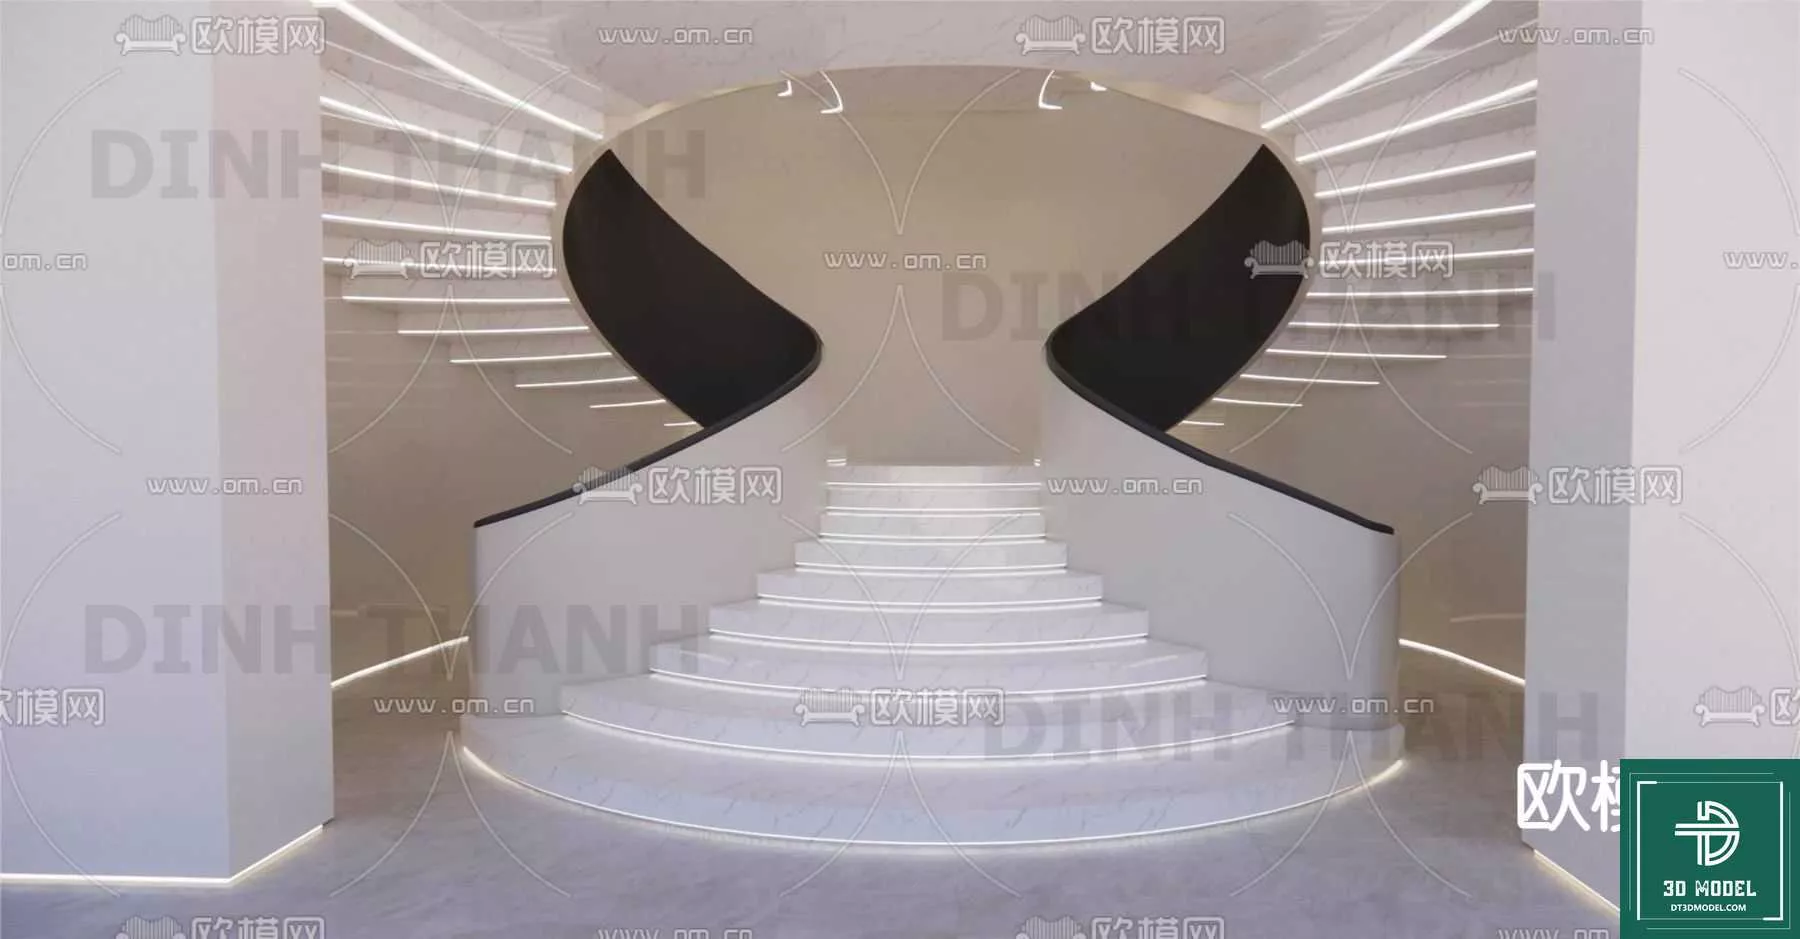 MODERN STAIR - SKETCHUP 3D MODEL - VRAY OR ENSCAPE - ID14256